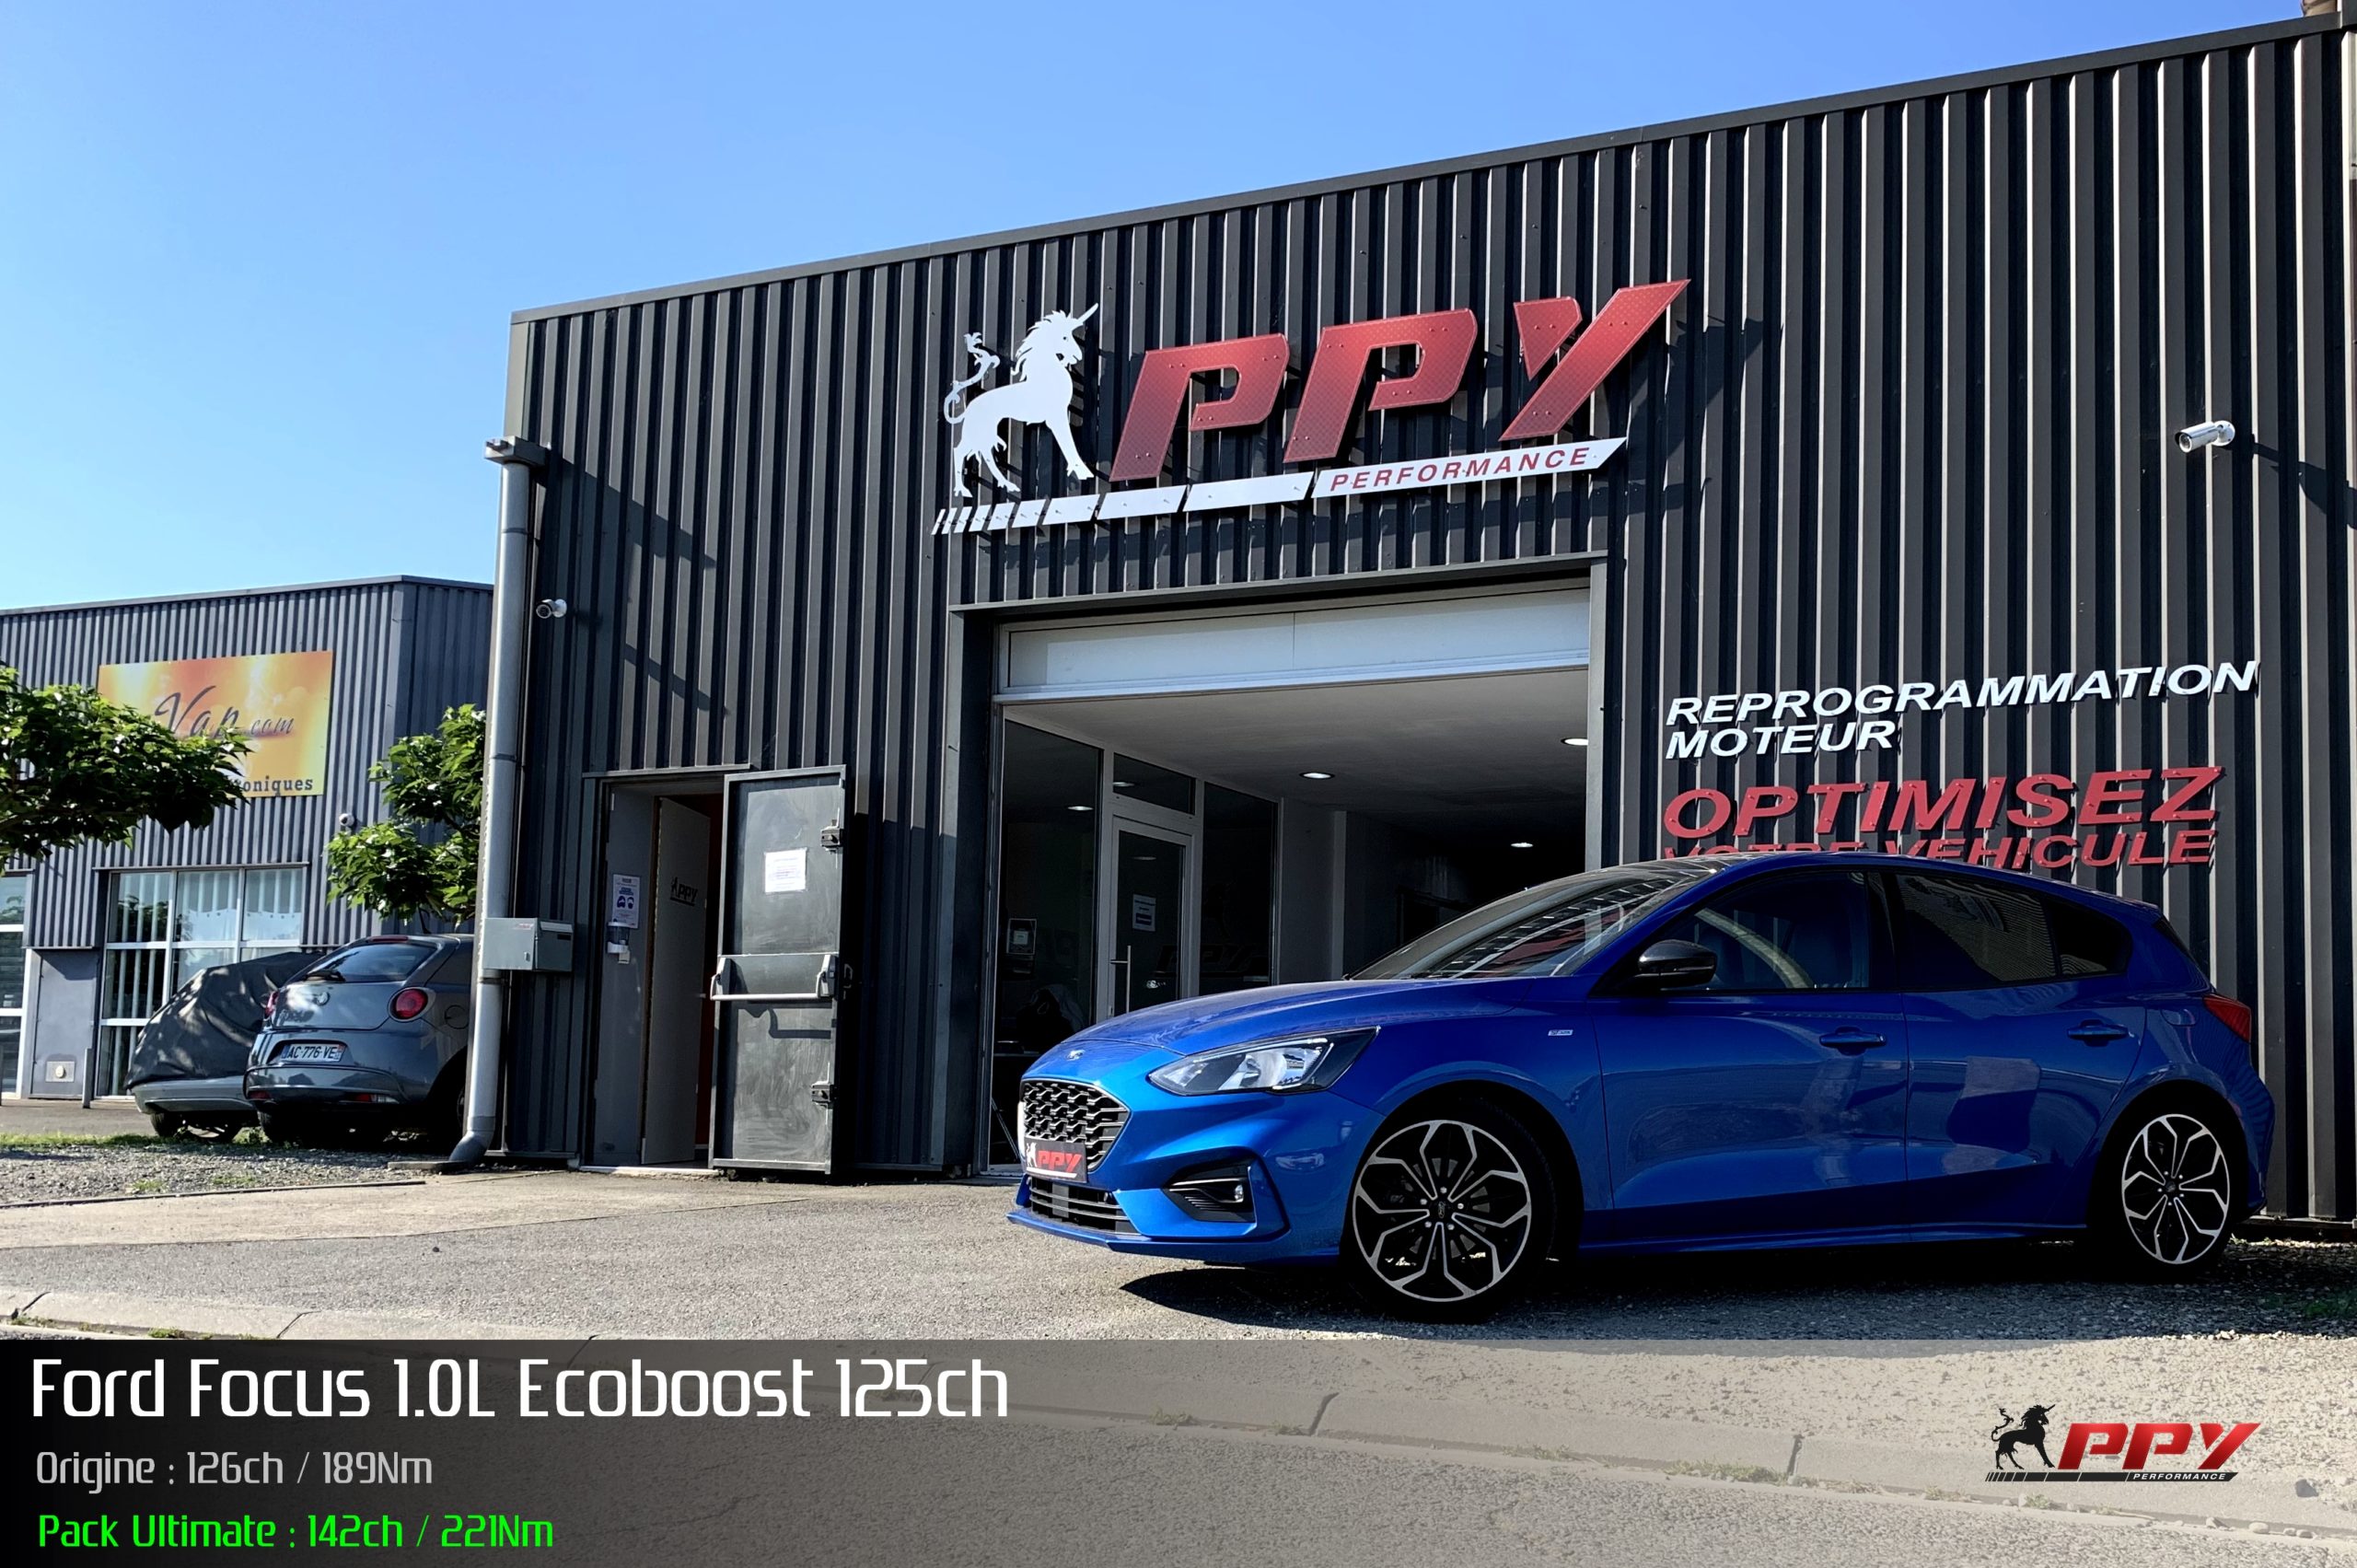 Ford Focus 1.0L Ecoboost 125ch